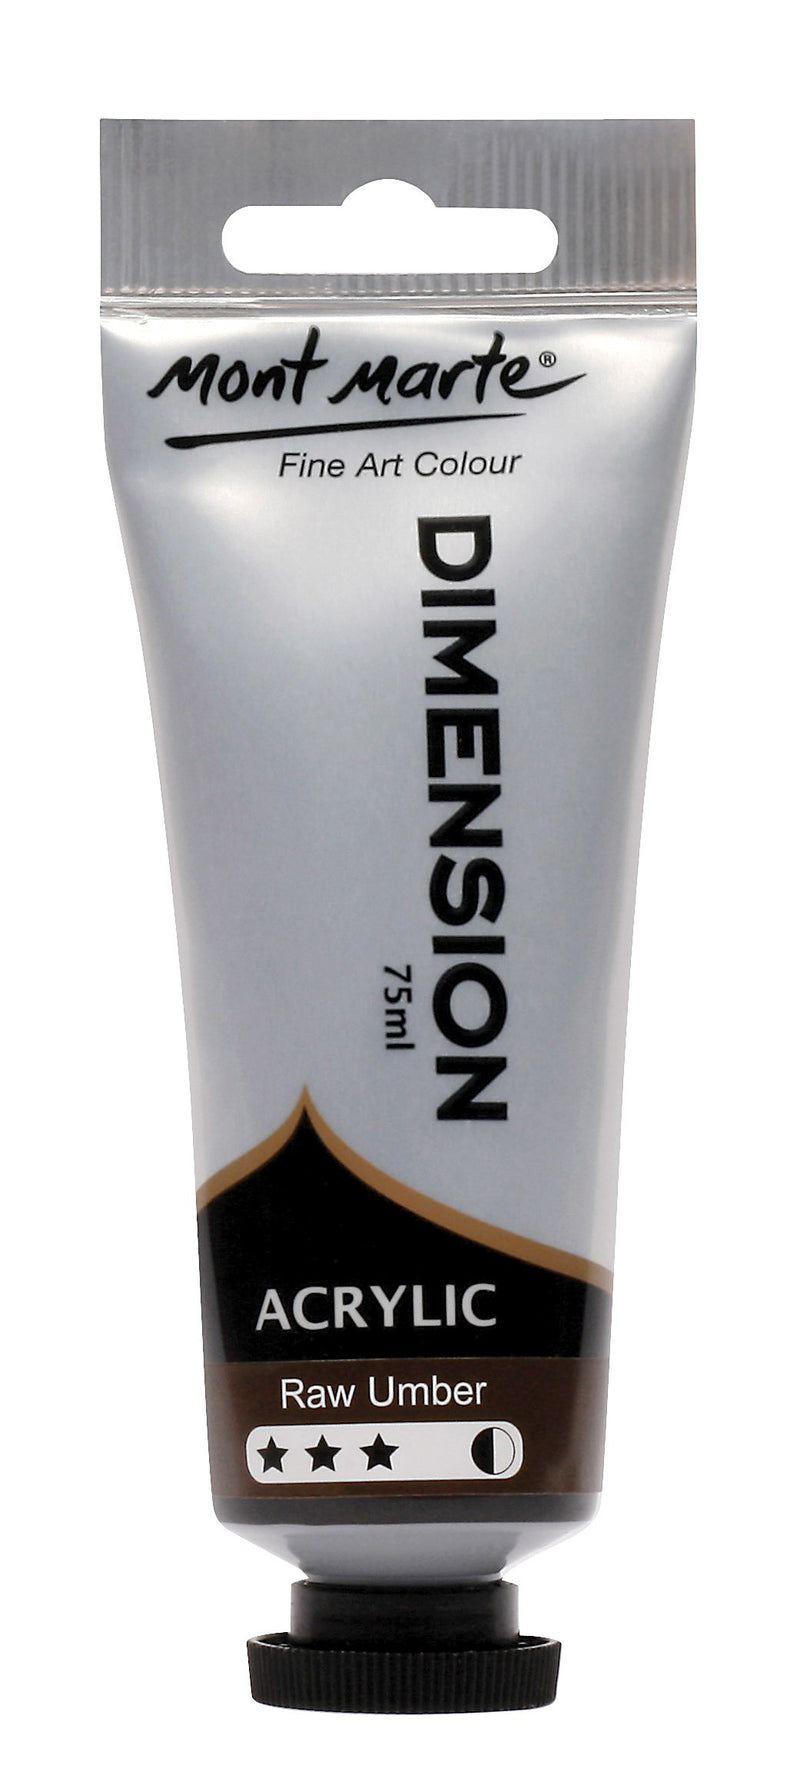 Acrylic Dimension Paint, Raw Umber, 75ml, pnt0146